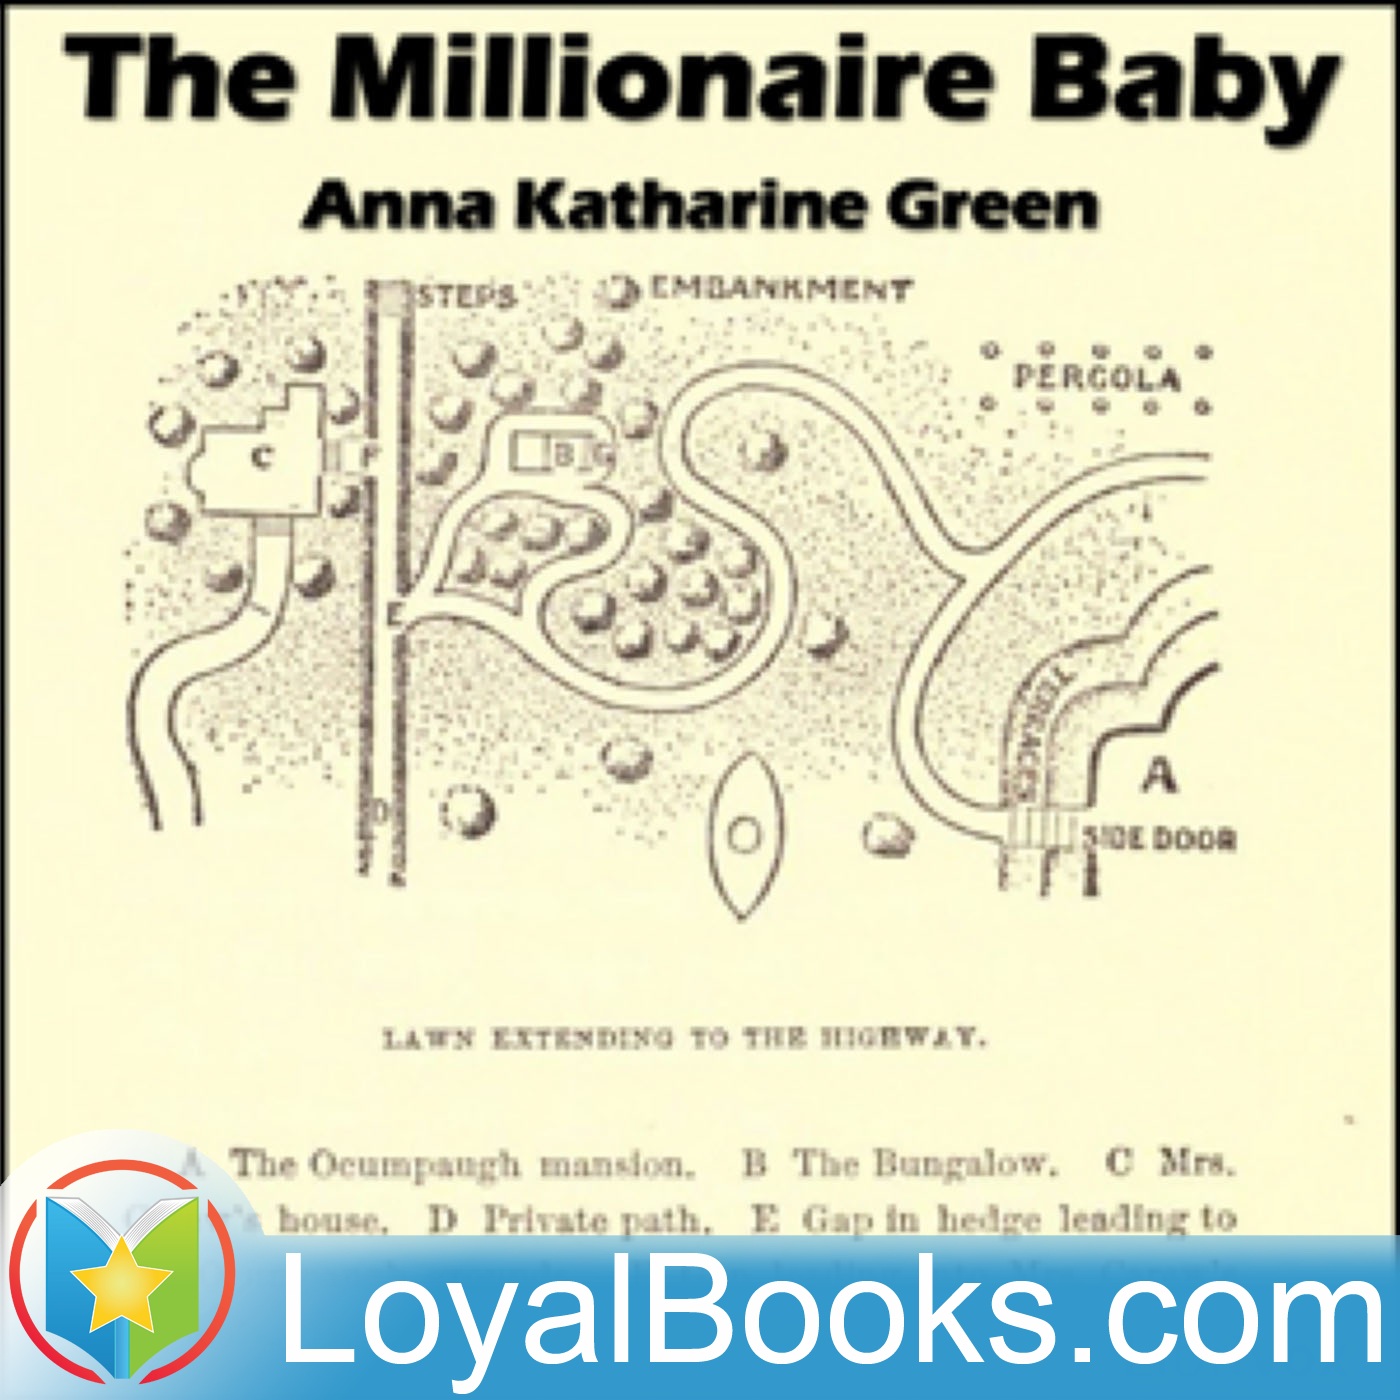 The Millionaire Baby by Anna Katharine Green:Loyal Books